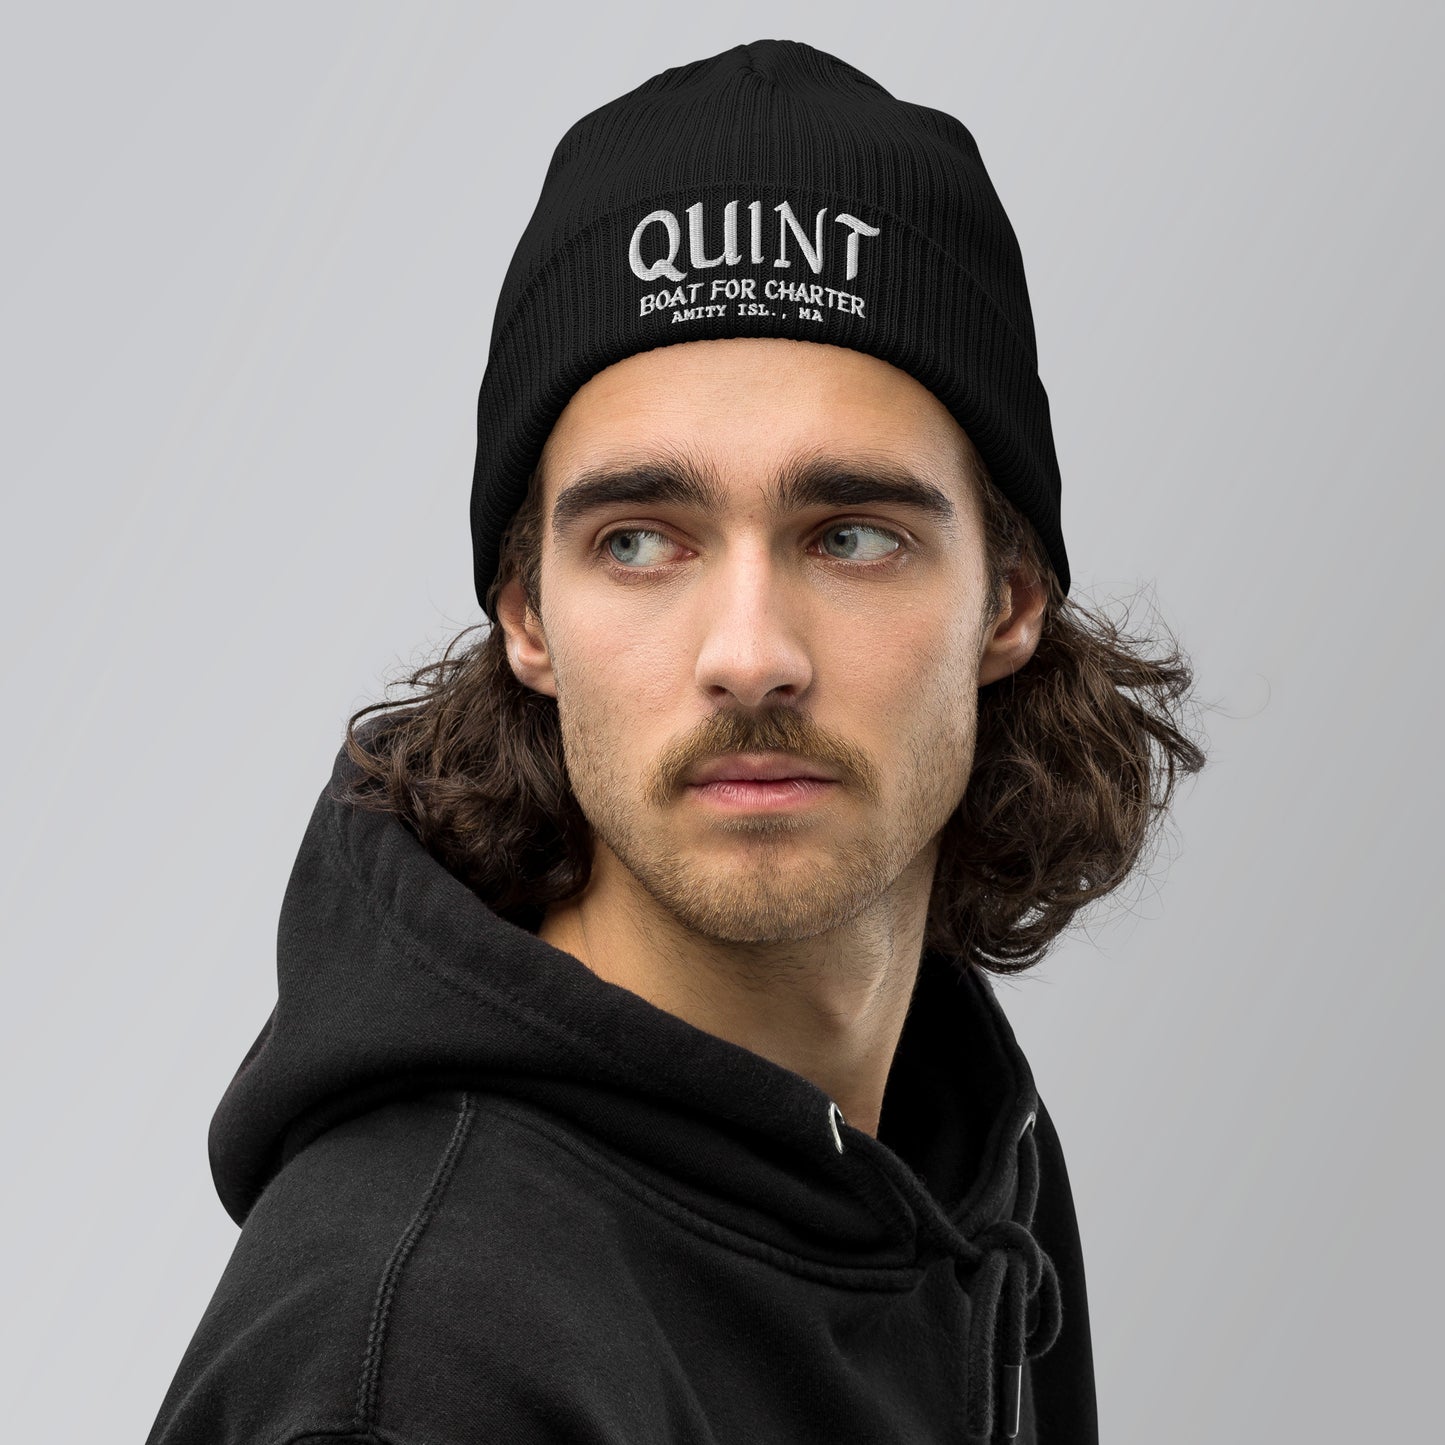 JAWS Inspired "Quint Boat For Charter" Organic ribbed beanie